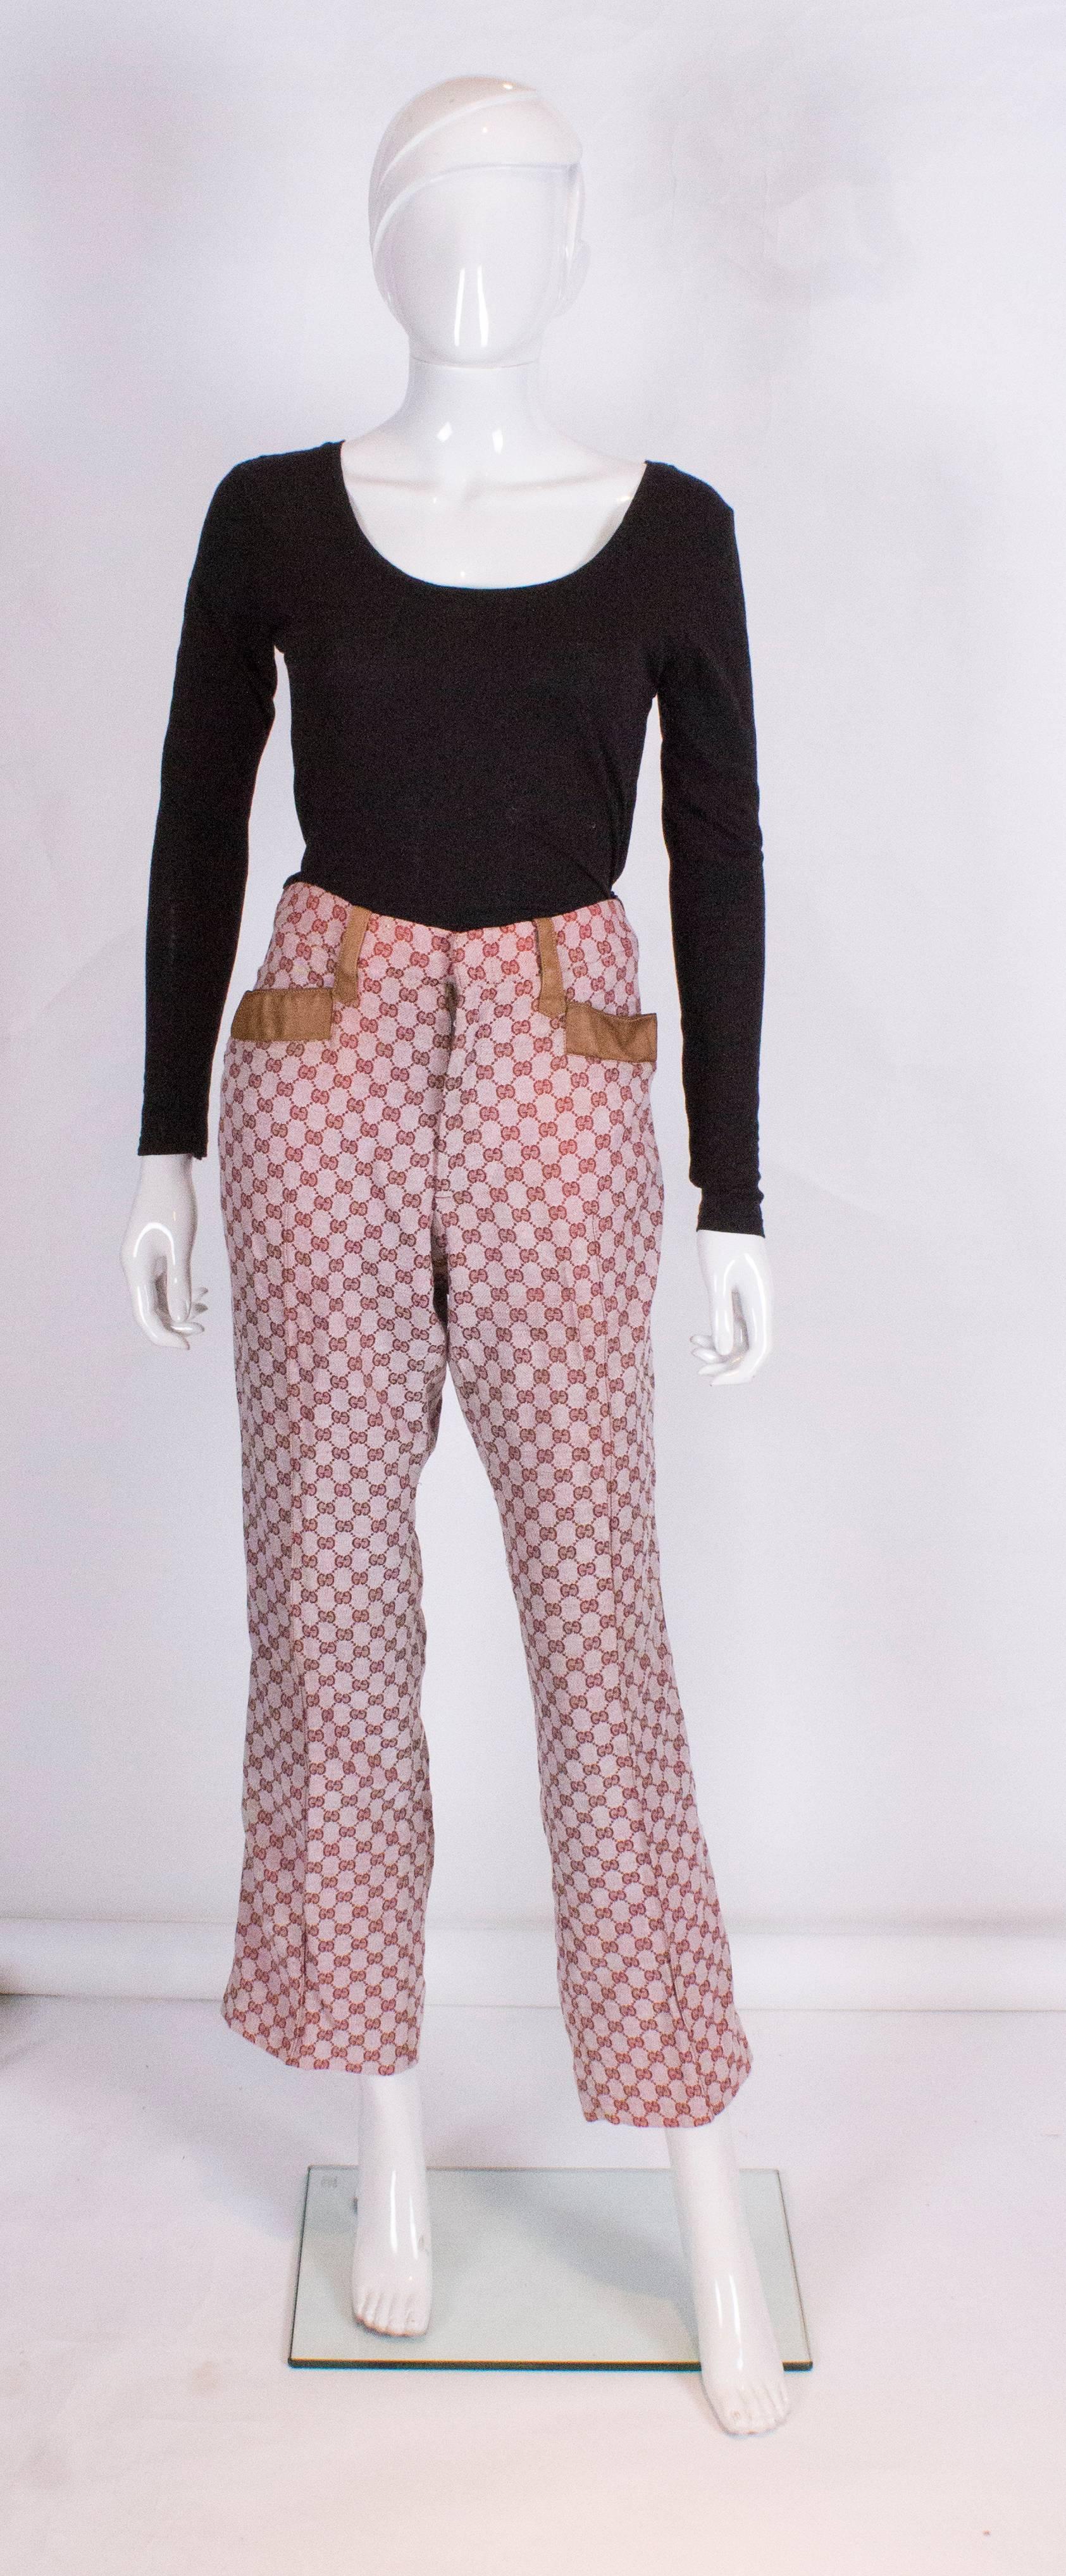 A great pair of pants from Gucci. They are made of Gucci logo fabric with a leather trim. The trim is on the two front pockets and a strip of leather down the outside seam - very now.

Measurements: waist 32'', inside leg 29'', hem 1/12'',  hips 38''